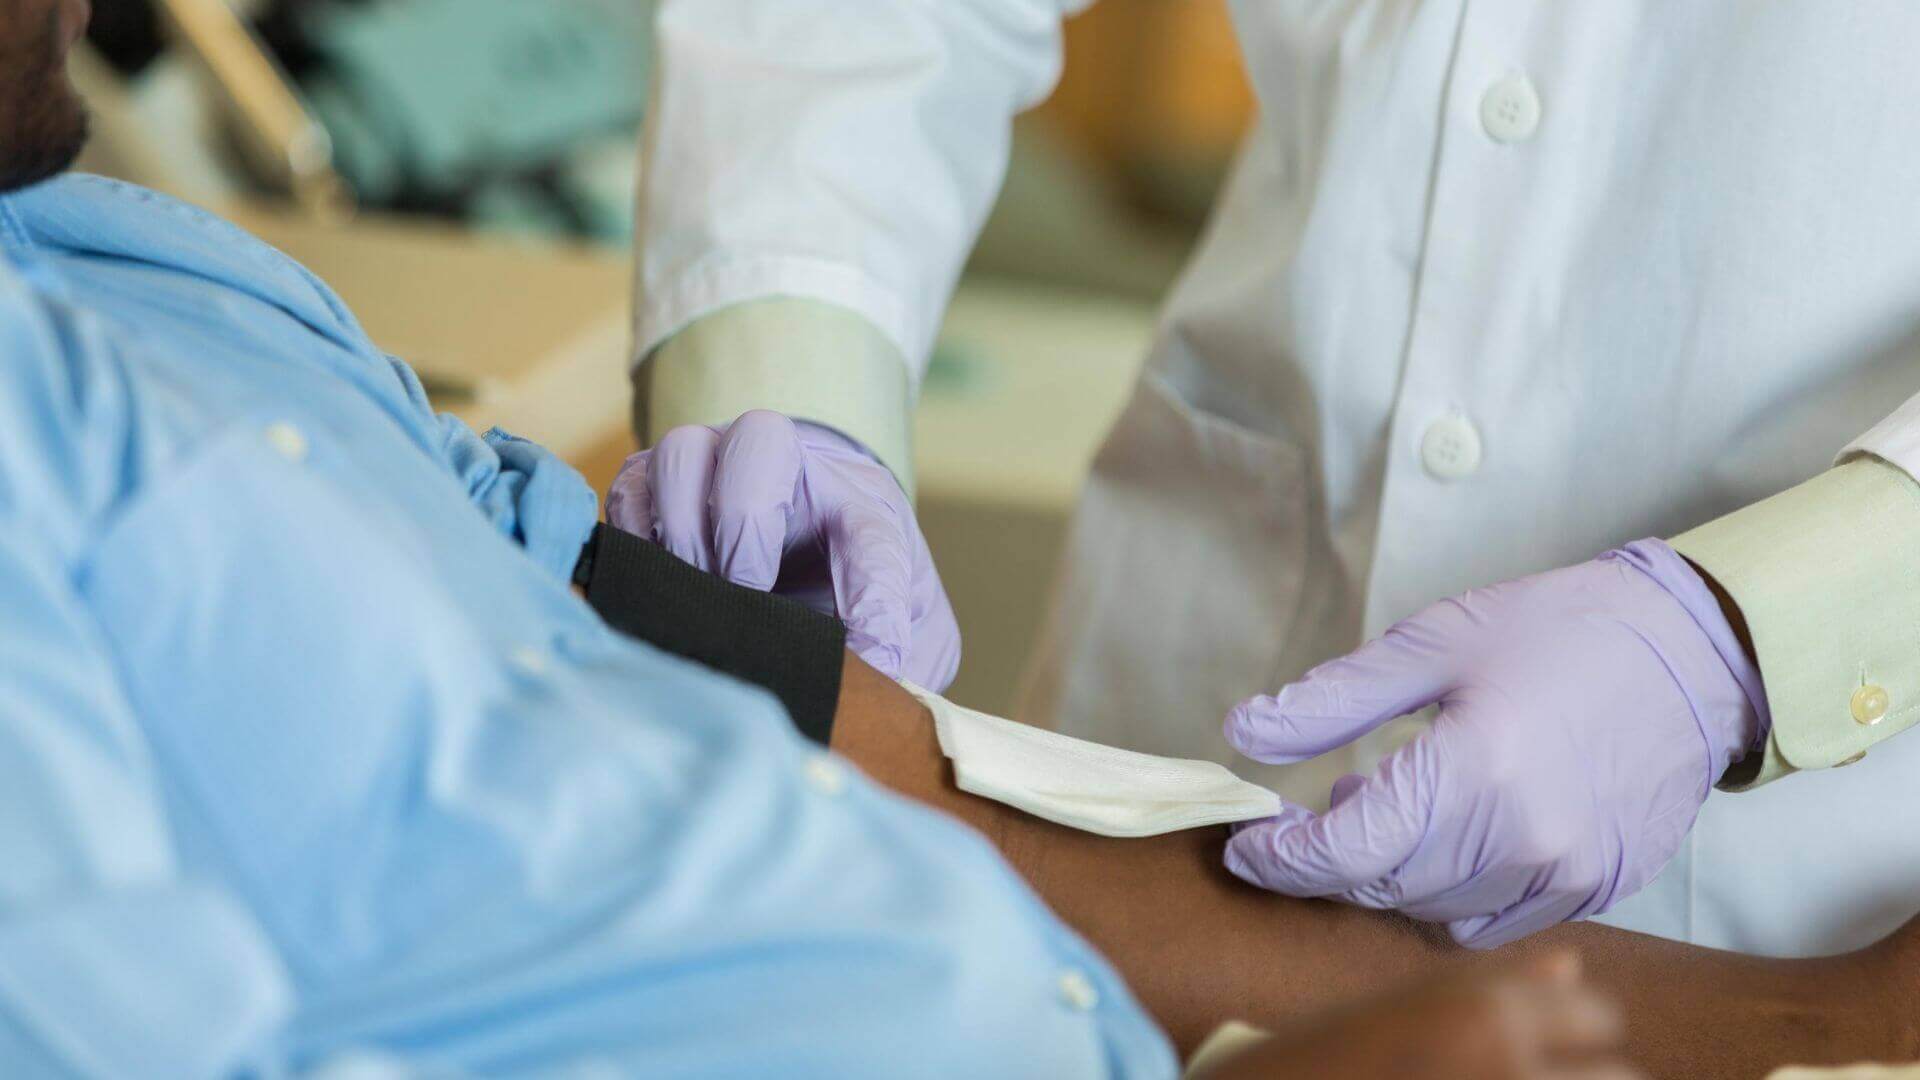 How To Obtain A Phlebotomist Certification